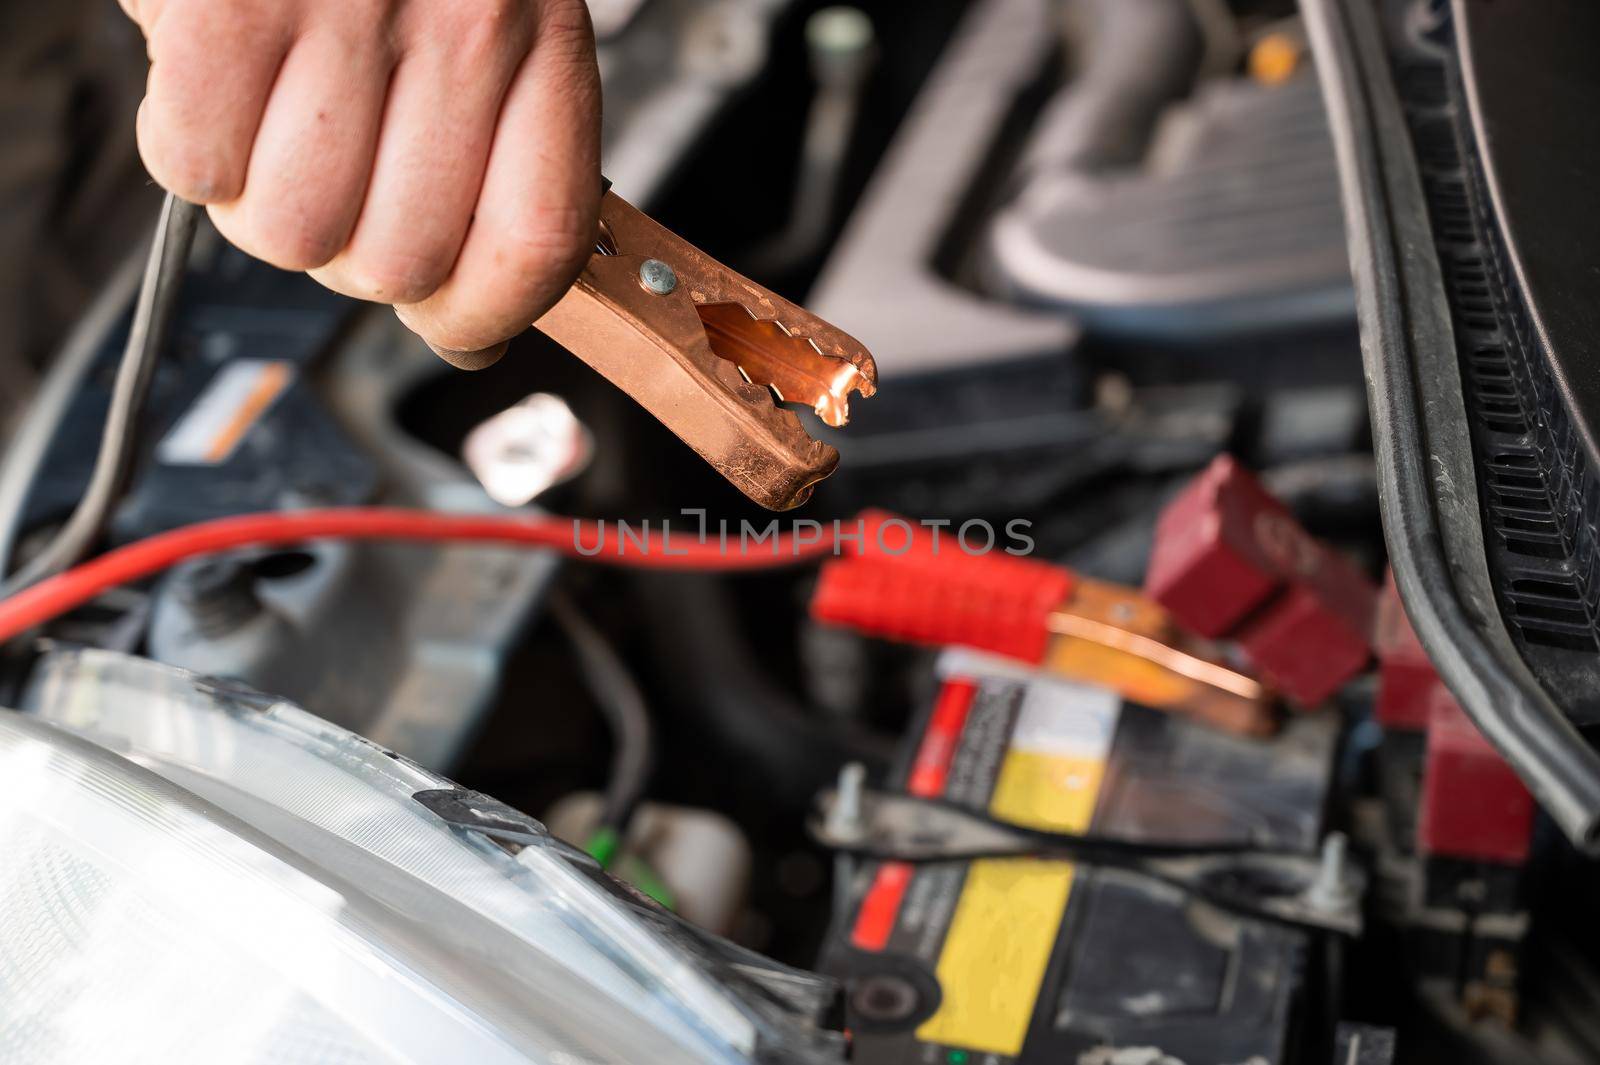 The mechanic connects the clamps to the discharged car battery